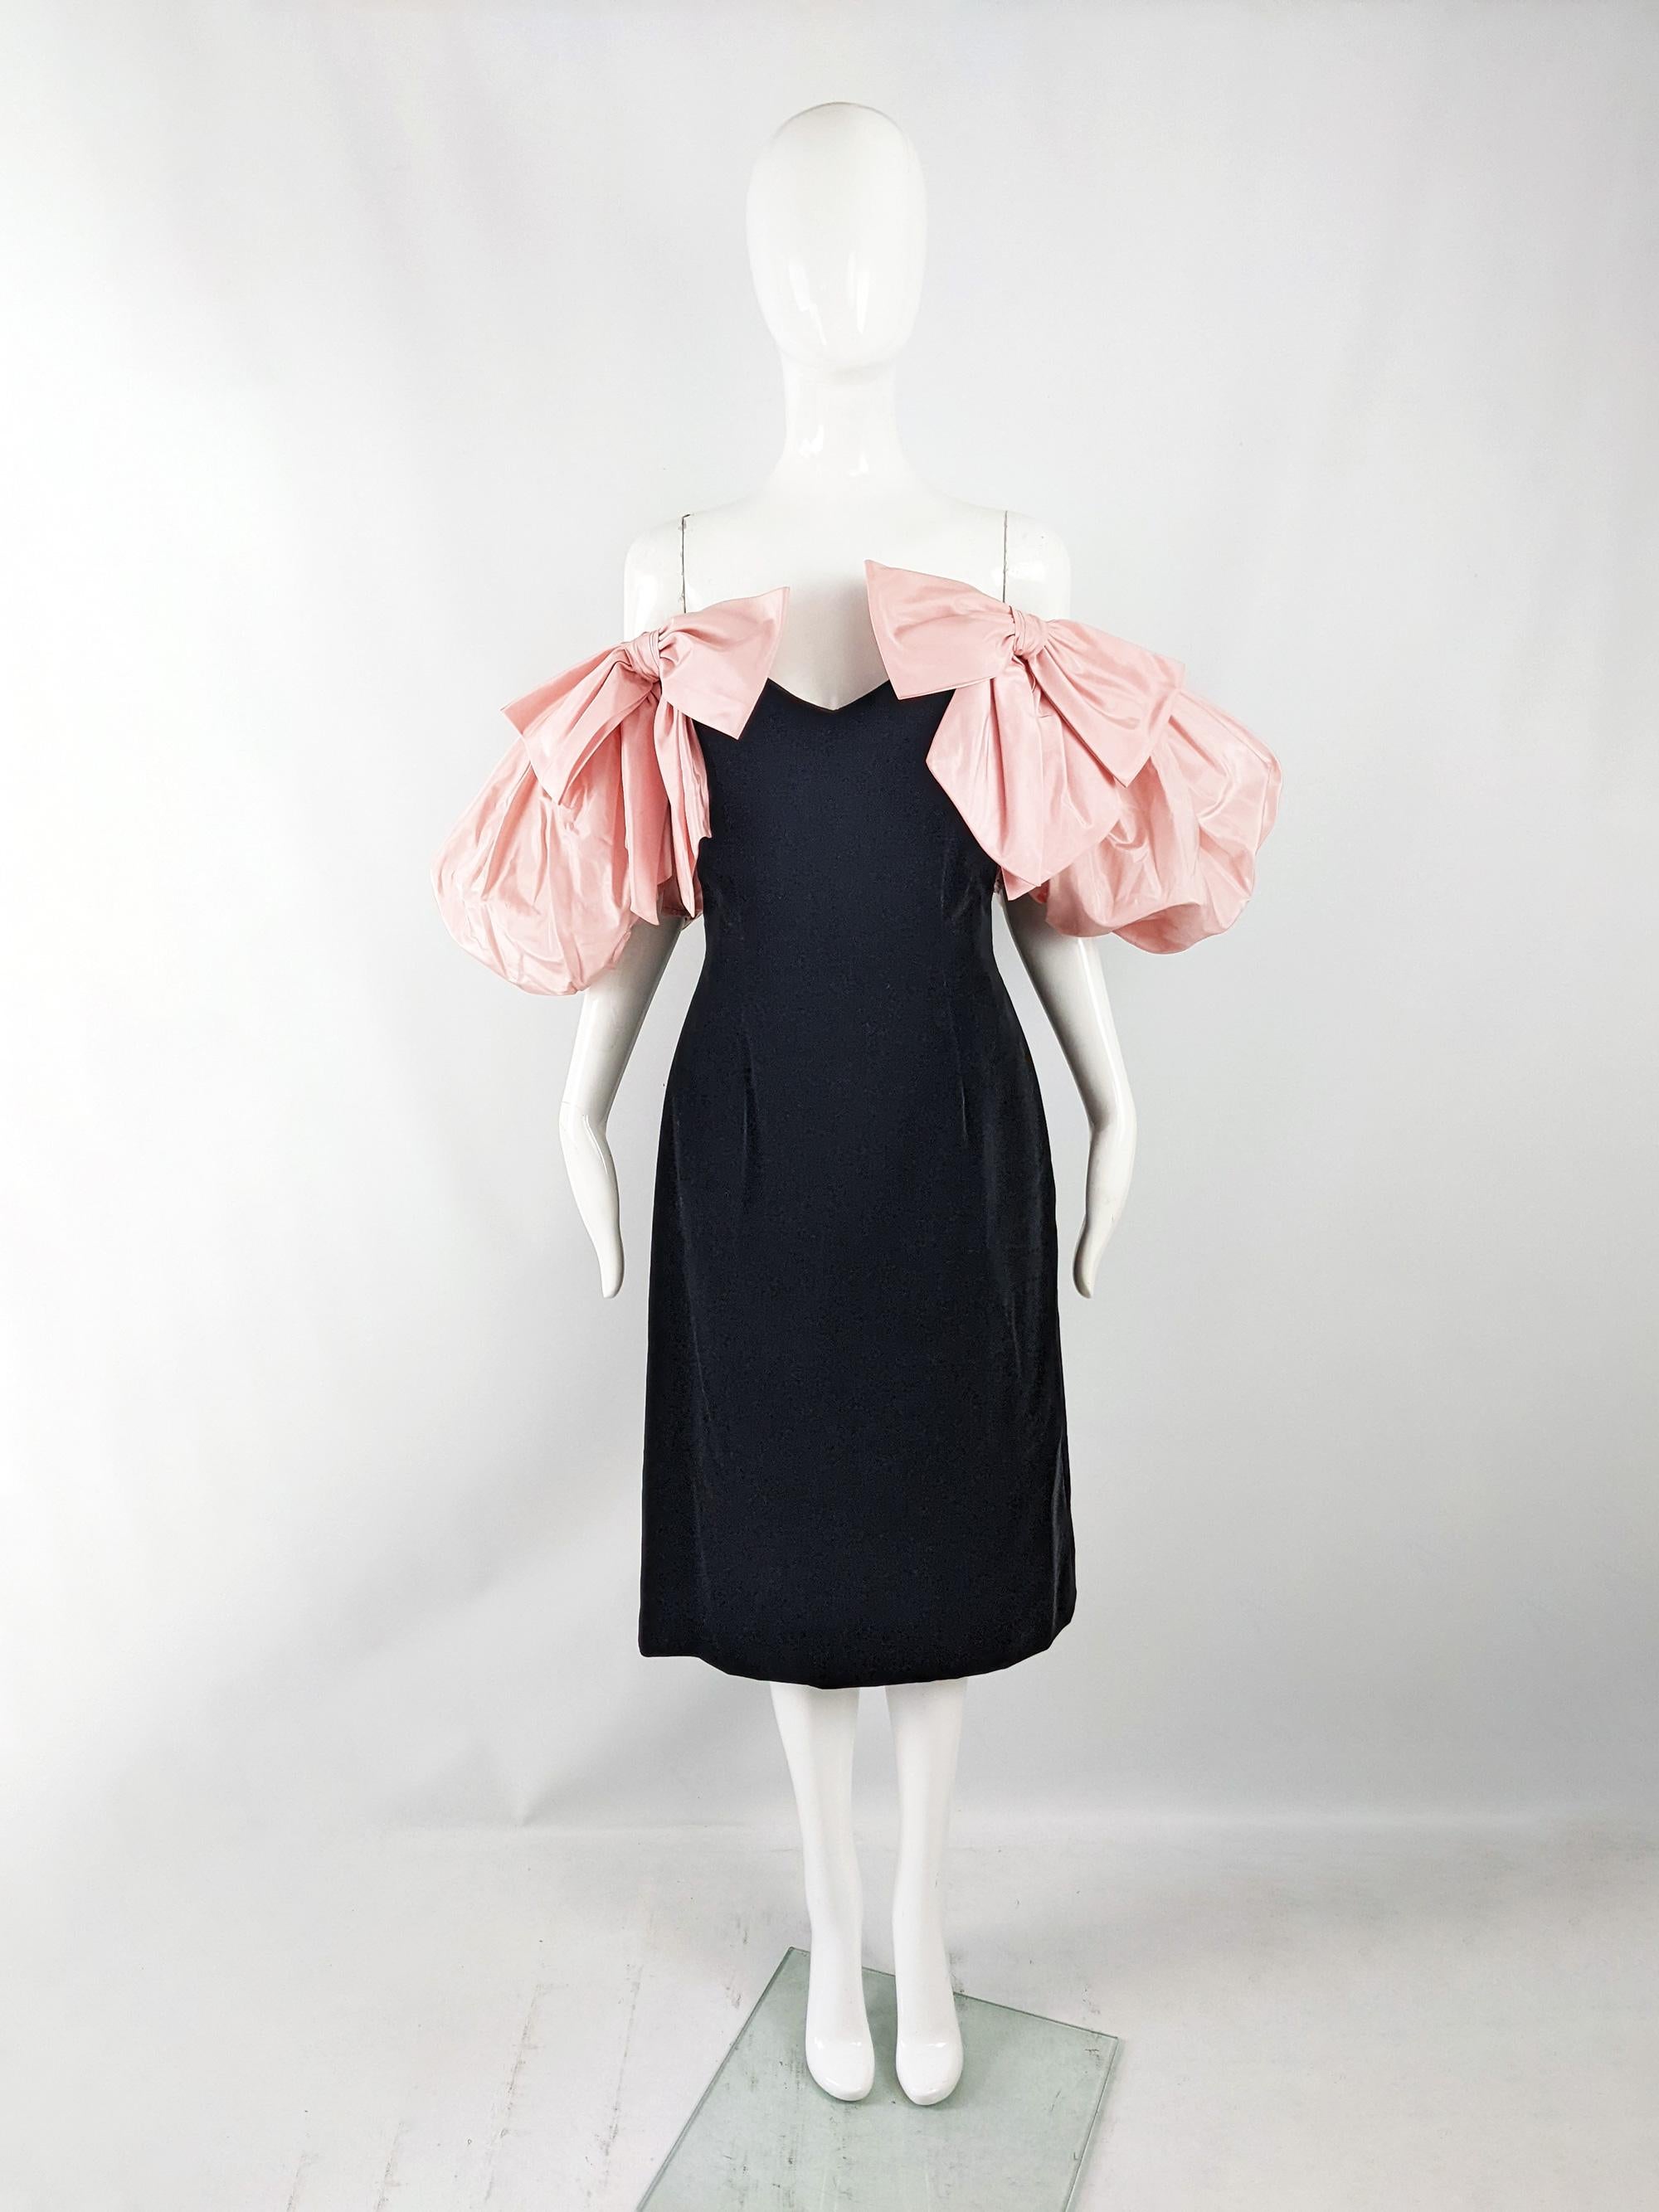 A breathtaking vintage womens evening dress from the 80s by iconic British fashion designer, Gina Fratini. In a black velvet with incredible, dramatic puffed pink silk taffeta sleeves that are off the shoulder, adorned with giant bows at the